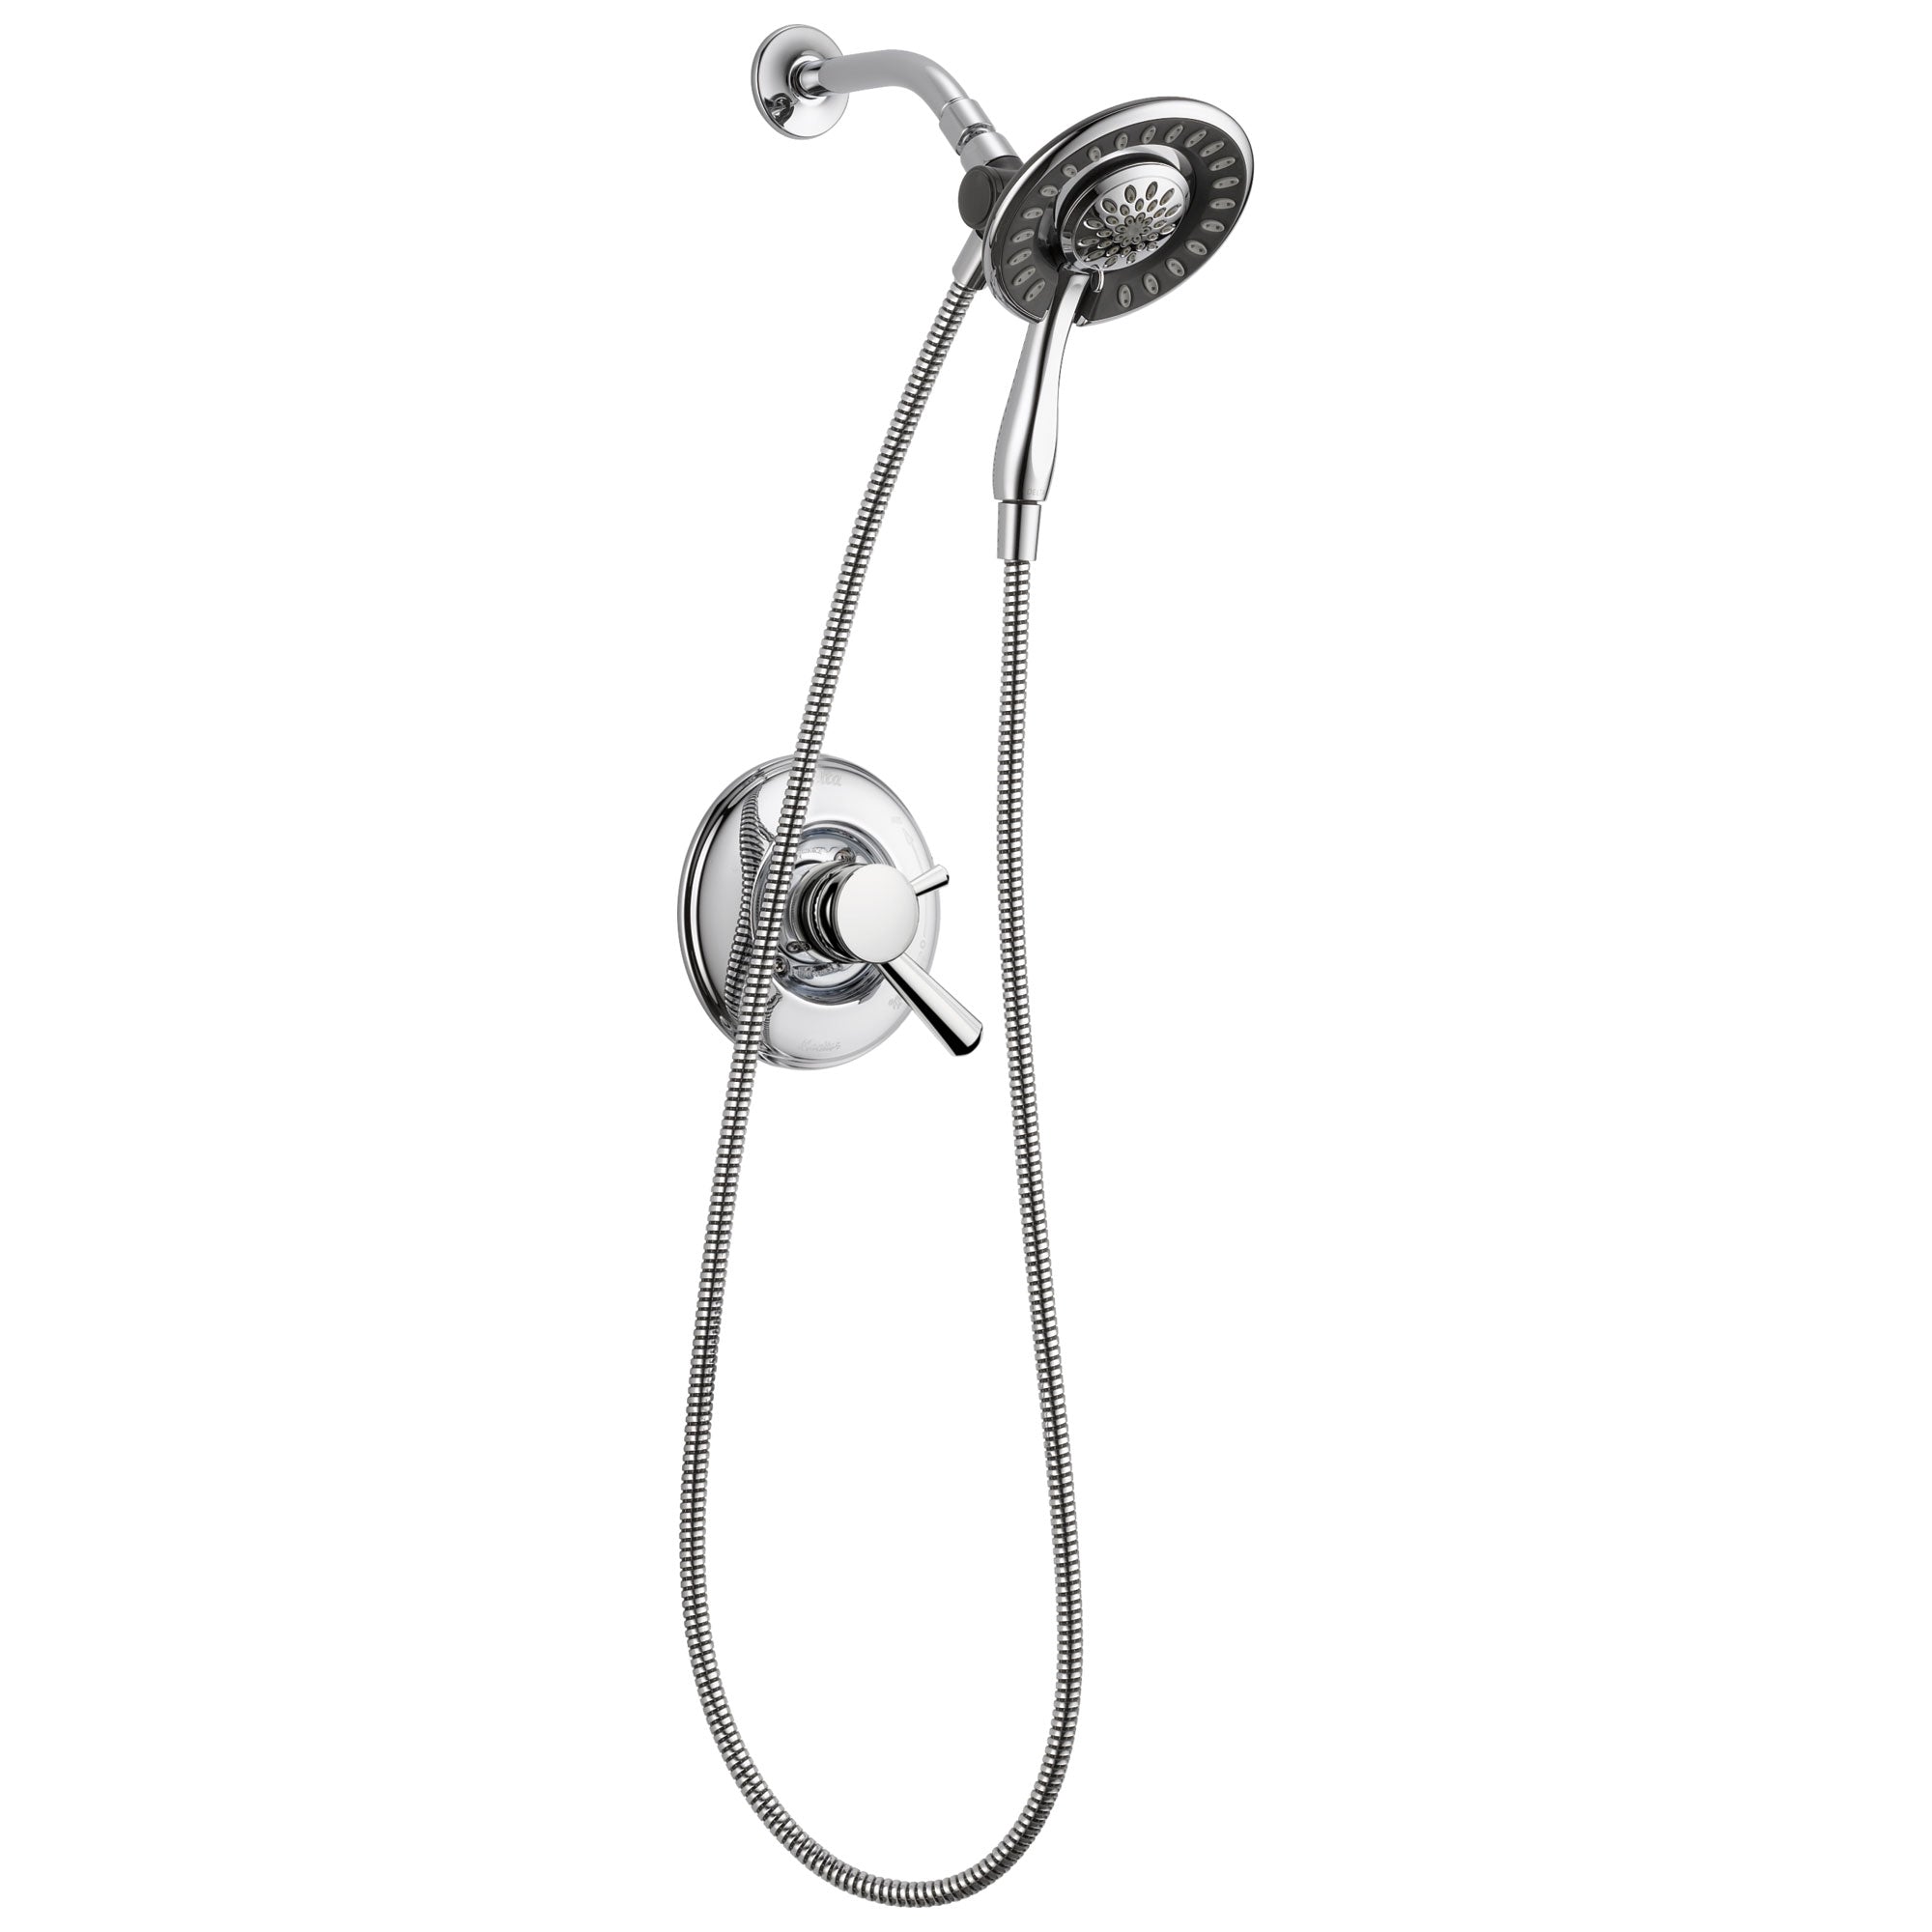 Delta Linden Collection Chrome Monitor 17 Dual Control Shower only Faucet with Handspray and Showerhead Combo Includes Rough Valve without Stops D2323V